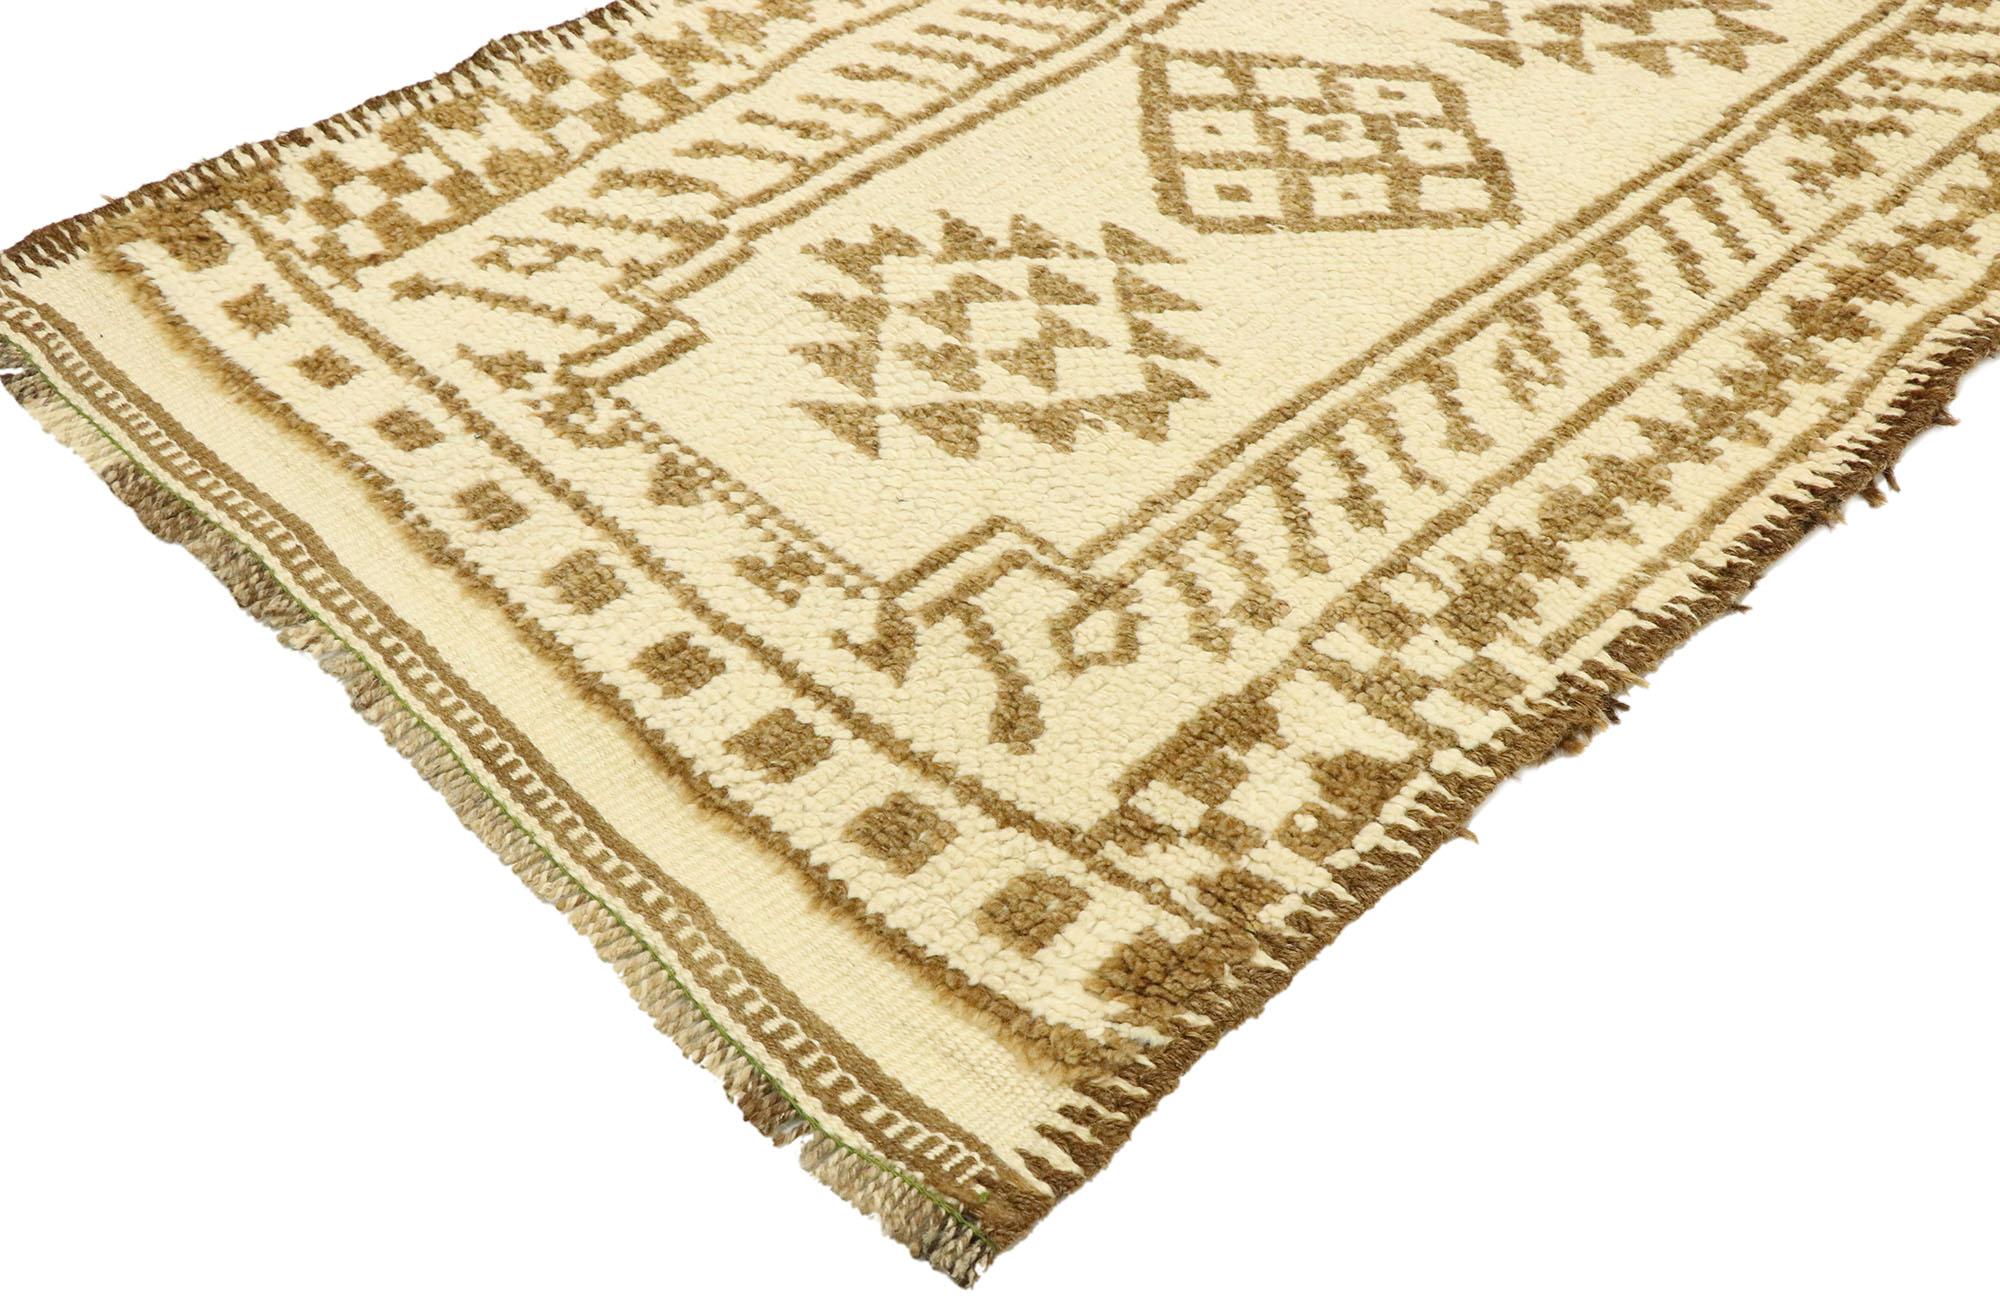 53109, vintage Turkish Oushak Runner with Neutral Navajo style. With its bold expressive design, incredible detail and texture, this hand knotted wool vintage Turkish Oushak rug is a captivating vision of woven beauty showcasing neutral Navajo